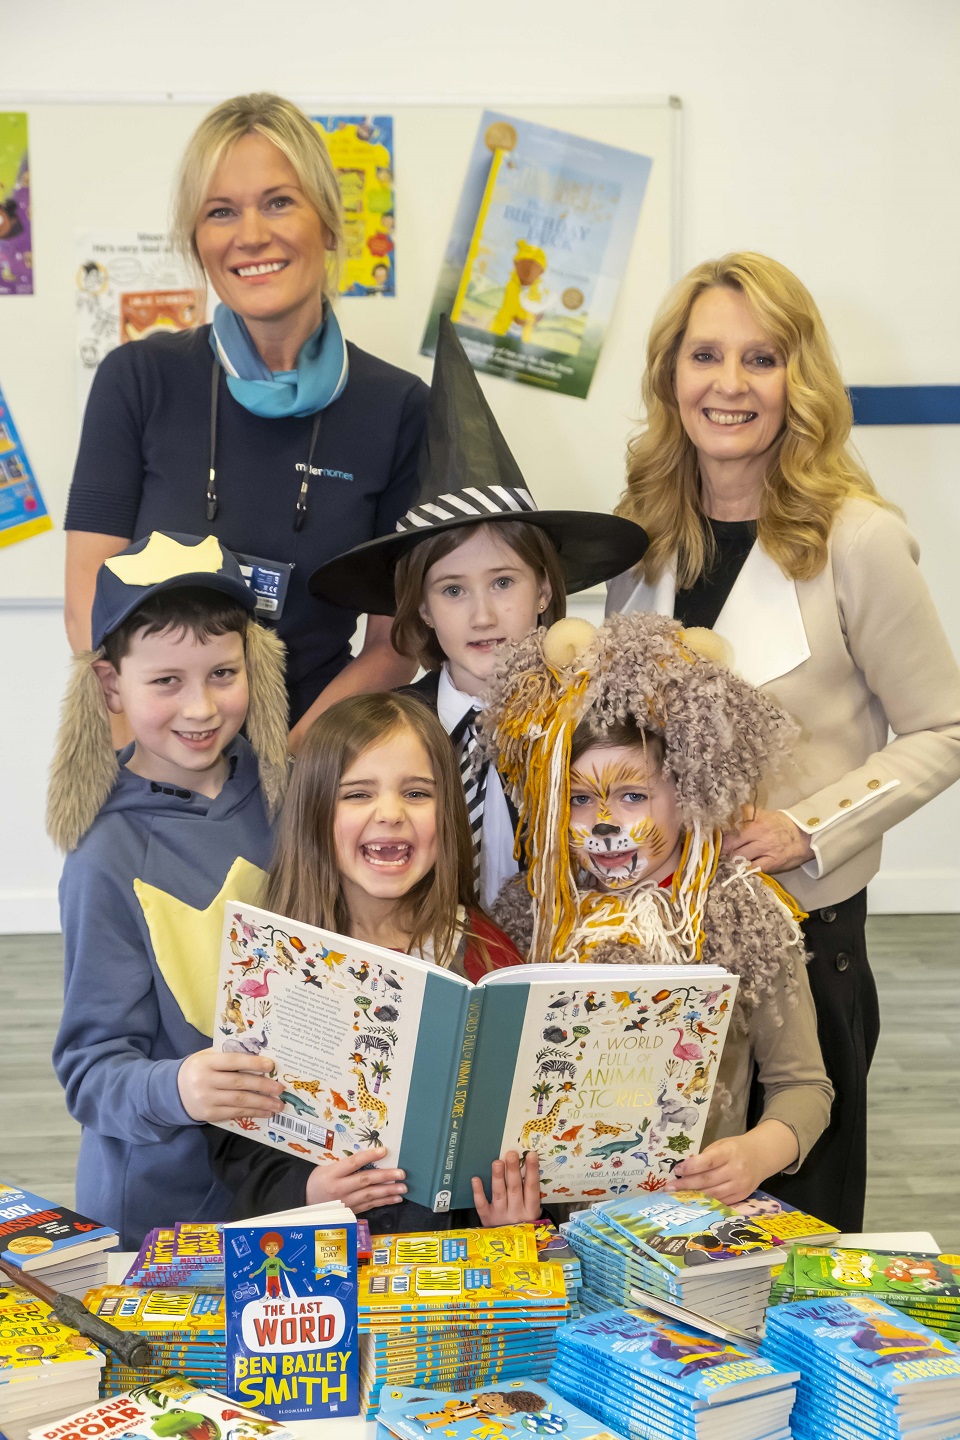 Miller Homes donates funds to primary school on World Book Day